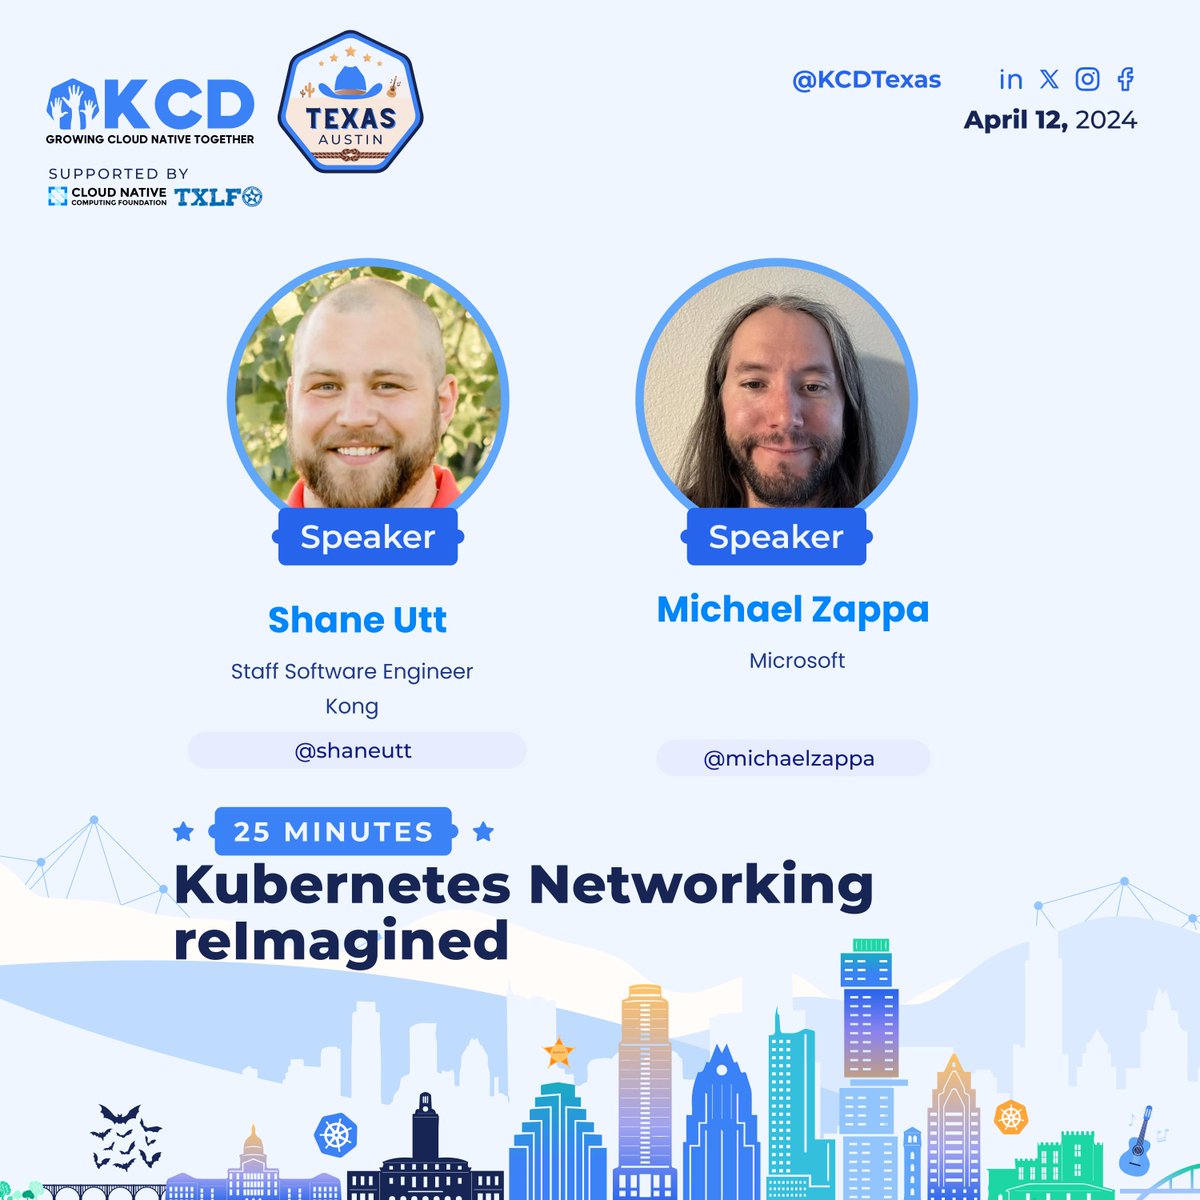 🚀 Join Shane Utt and Michael Zappa as they present 'Kubernetes Networking reImagined' at KCD Texas! 🌟 🔗buff.ly/3UQsqQd #KCDAustin #KubernetesNetworking #OpenSource #KCDTexas #CNCF